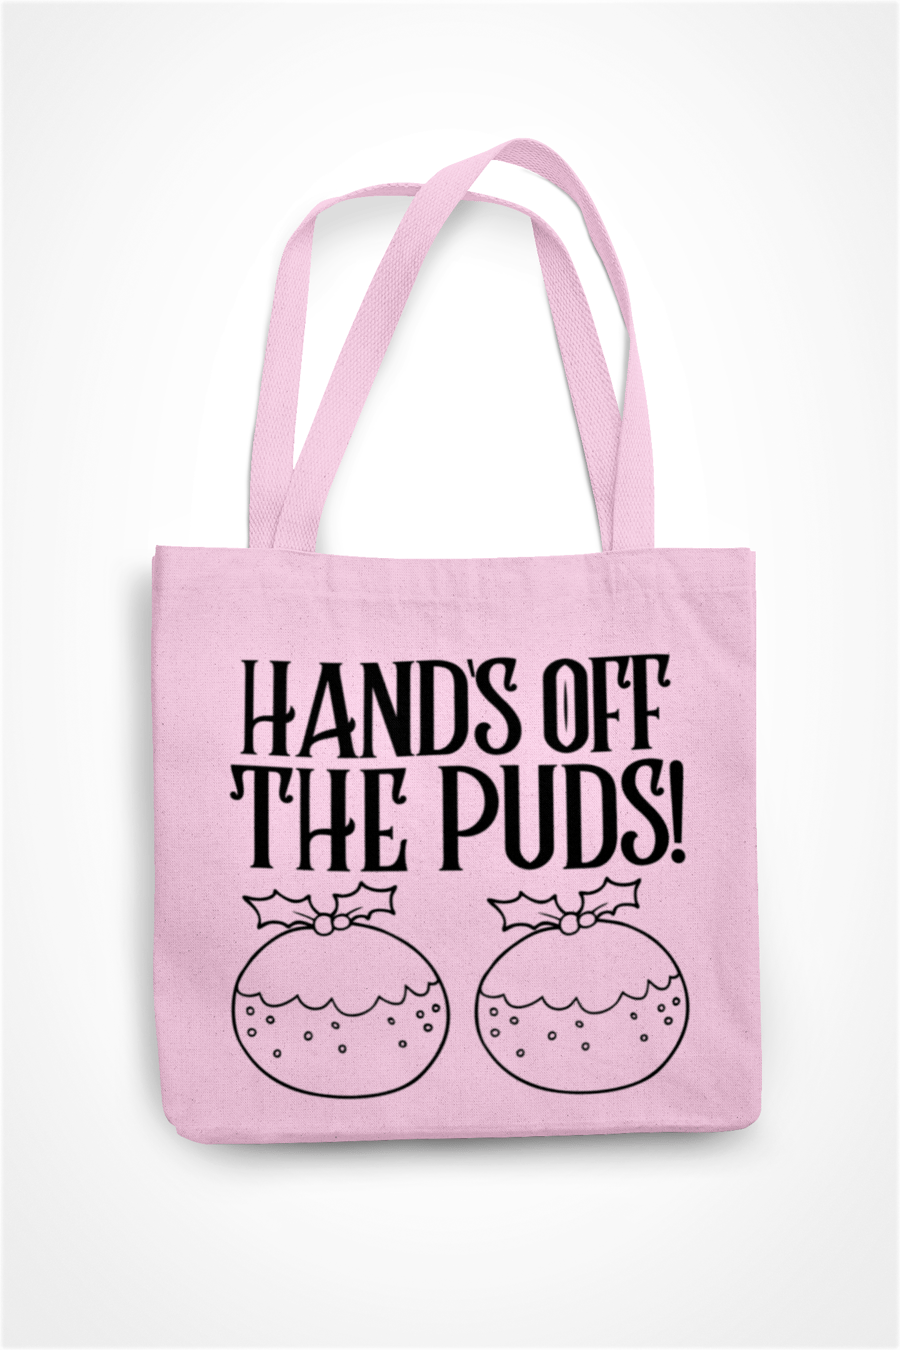 Hands Off The PUDS Novelty Funny Christmas Tote Bag - Shopper Bag xmas Gift